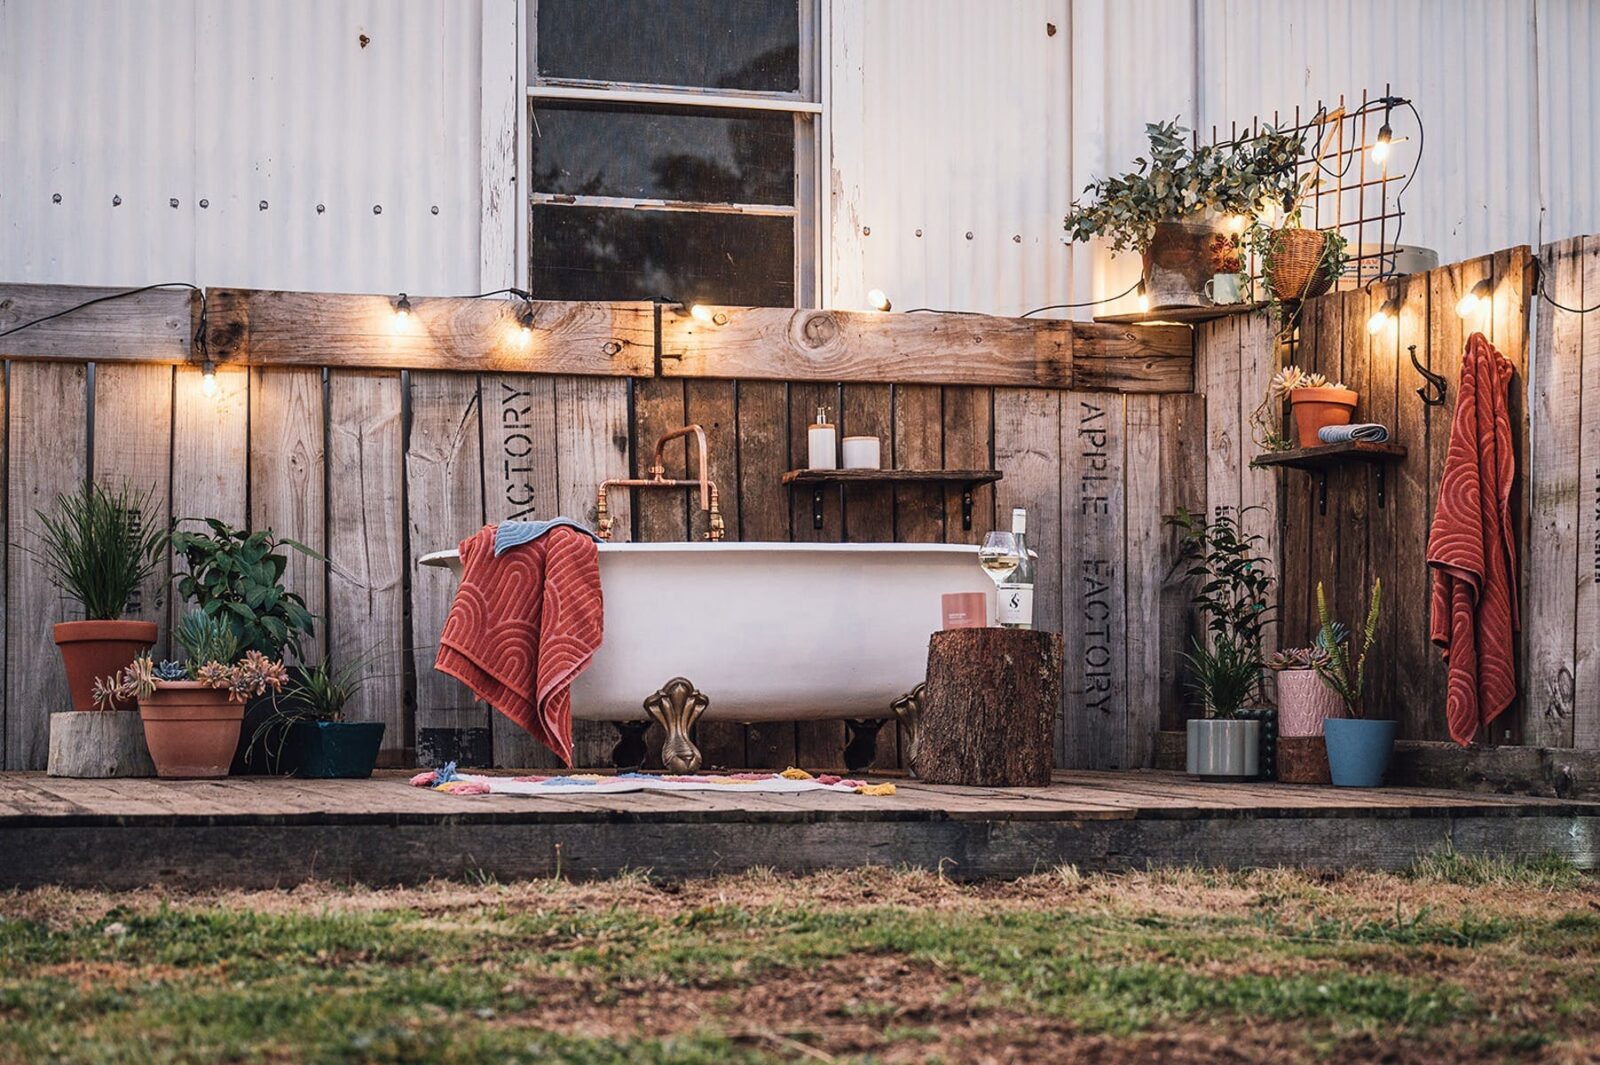 Relax at night in the outdoor bath and gaze up at the night sky